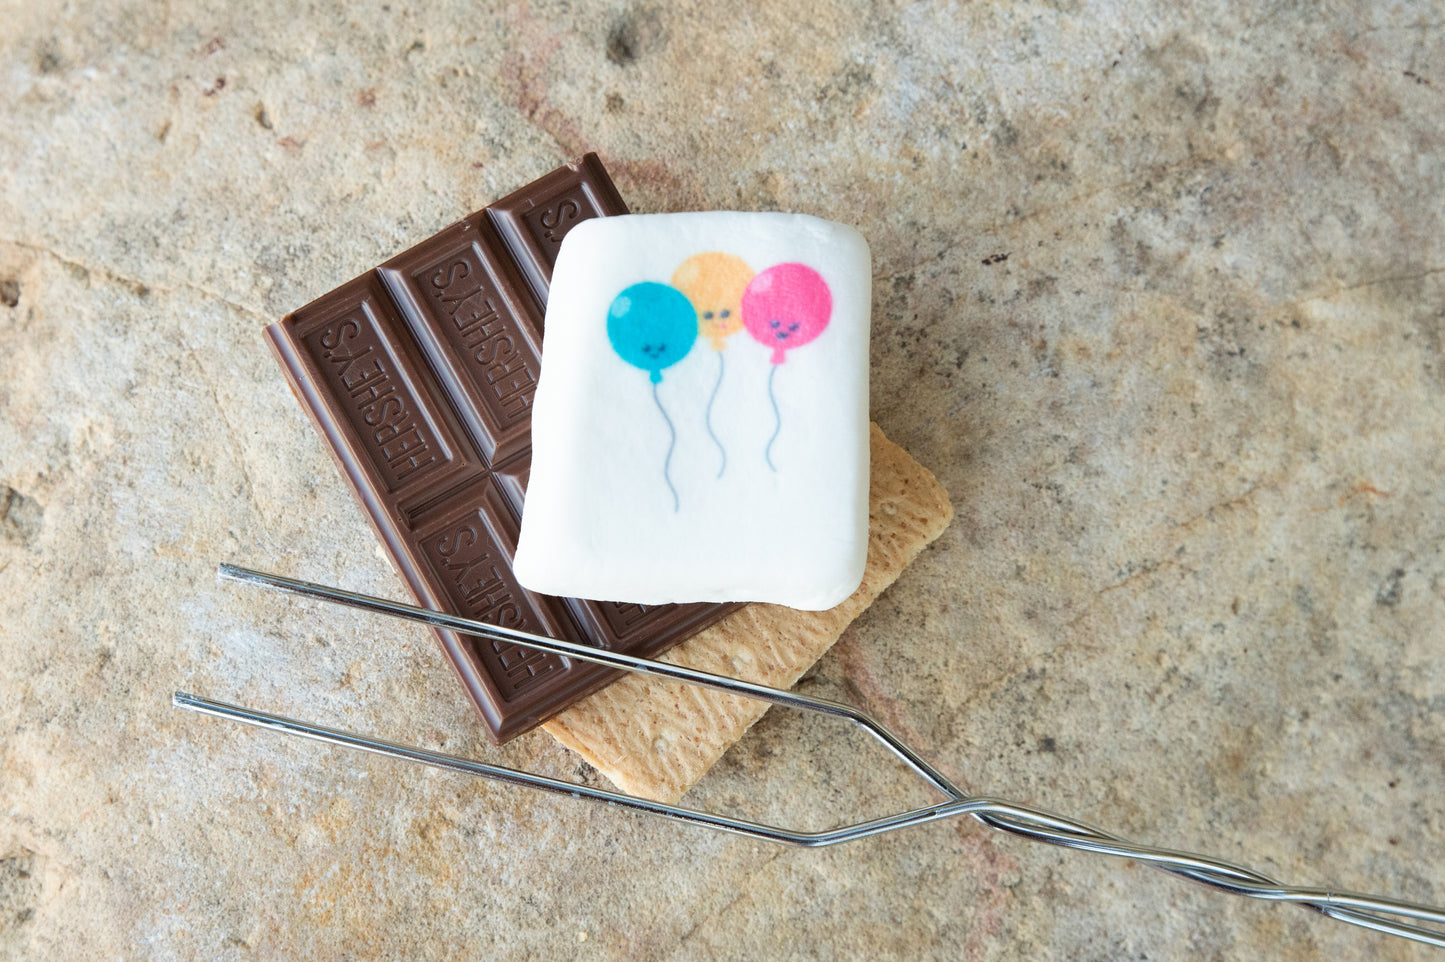 Custom Printed Marshmallow Box for Birthdays, Graduations, Baby Showers, and More!